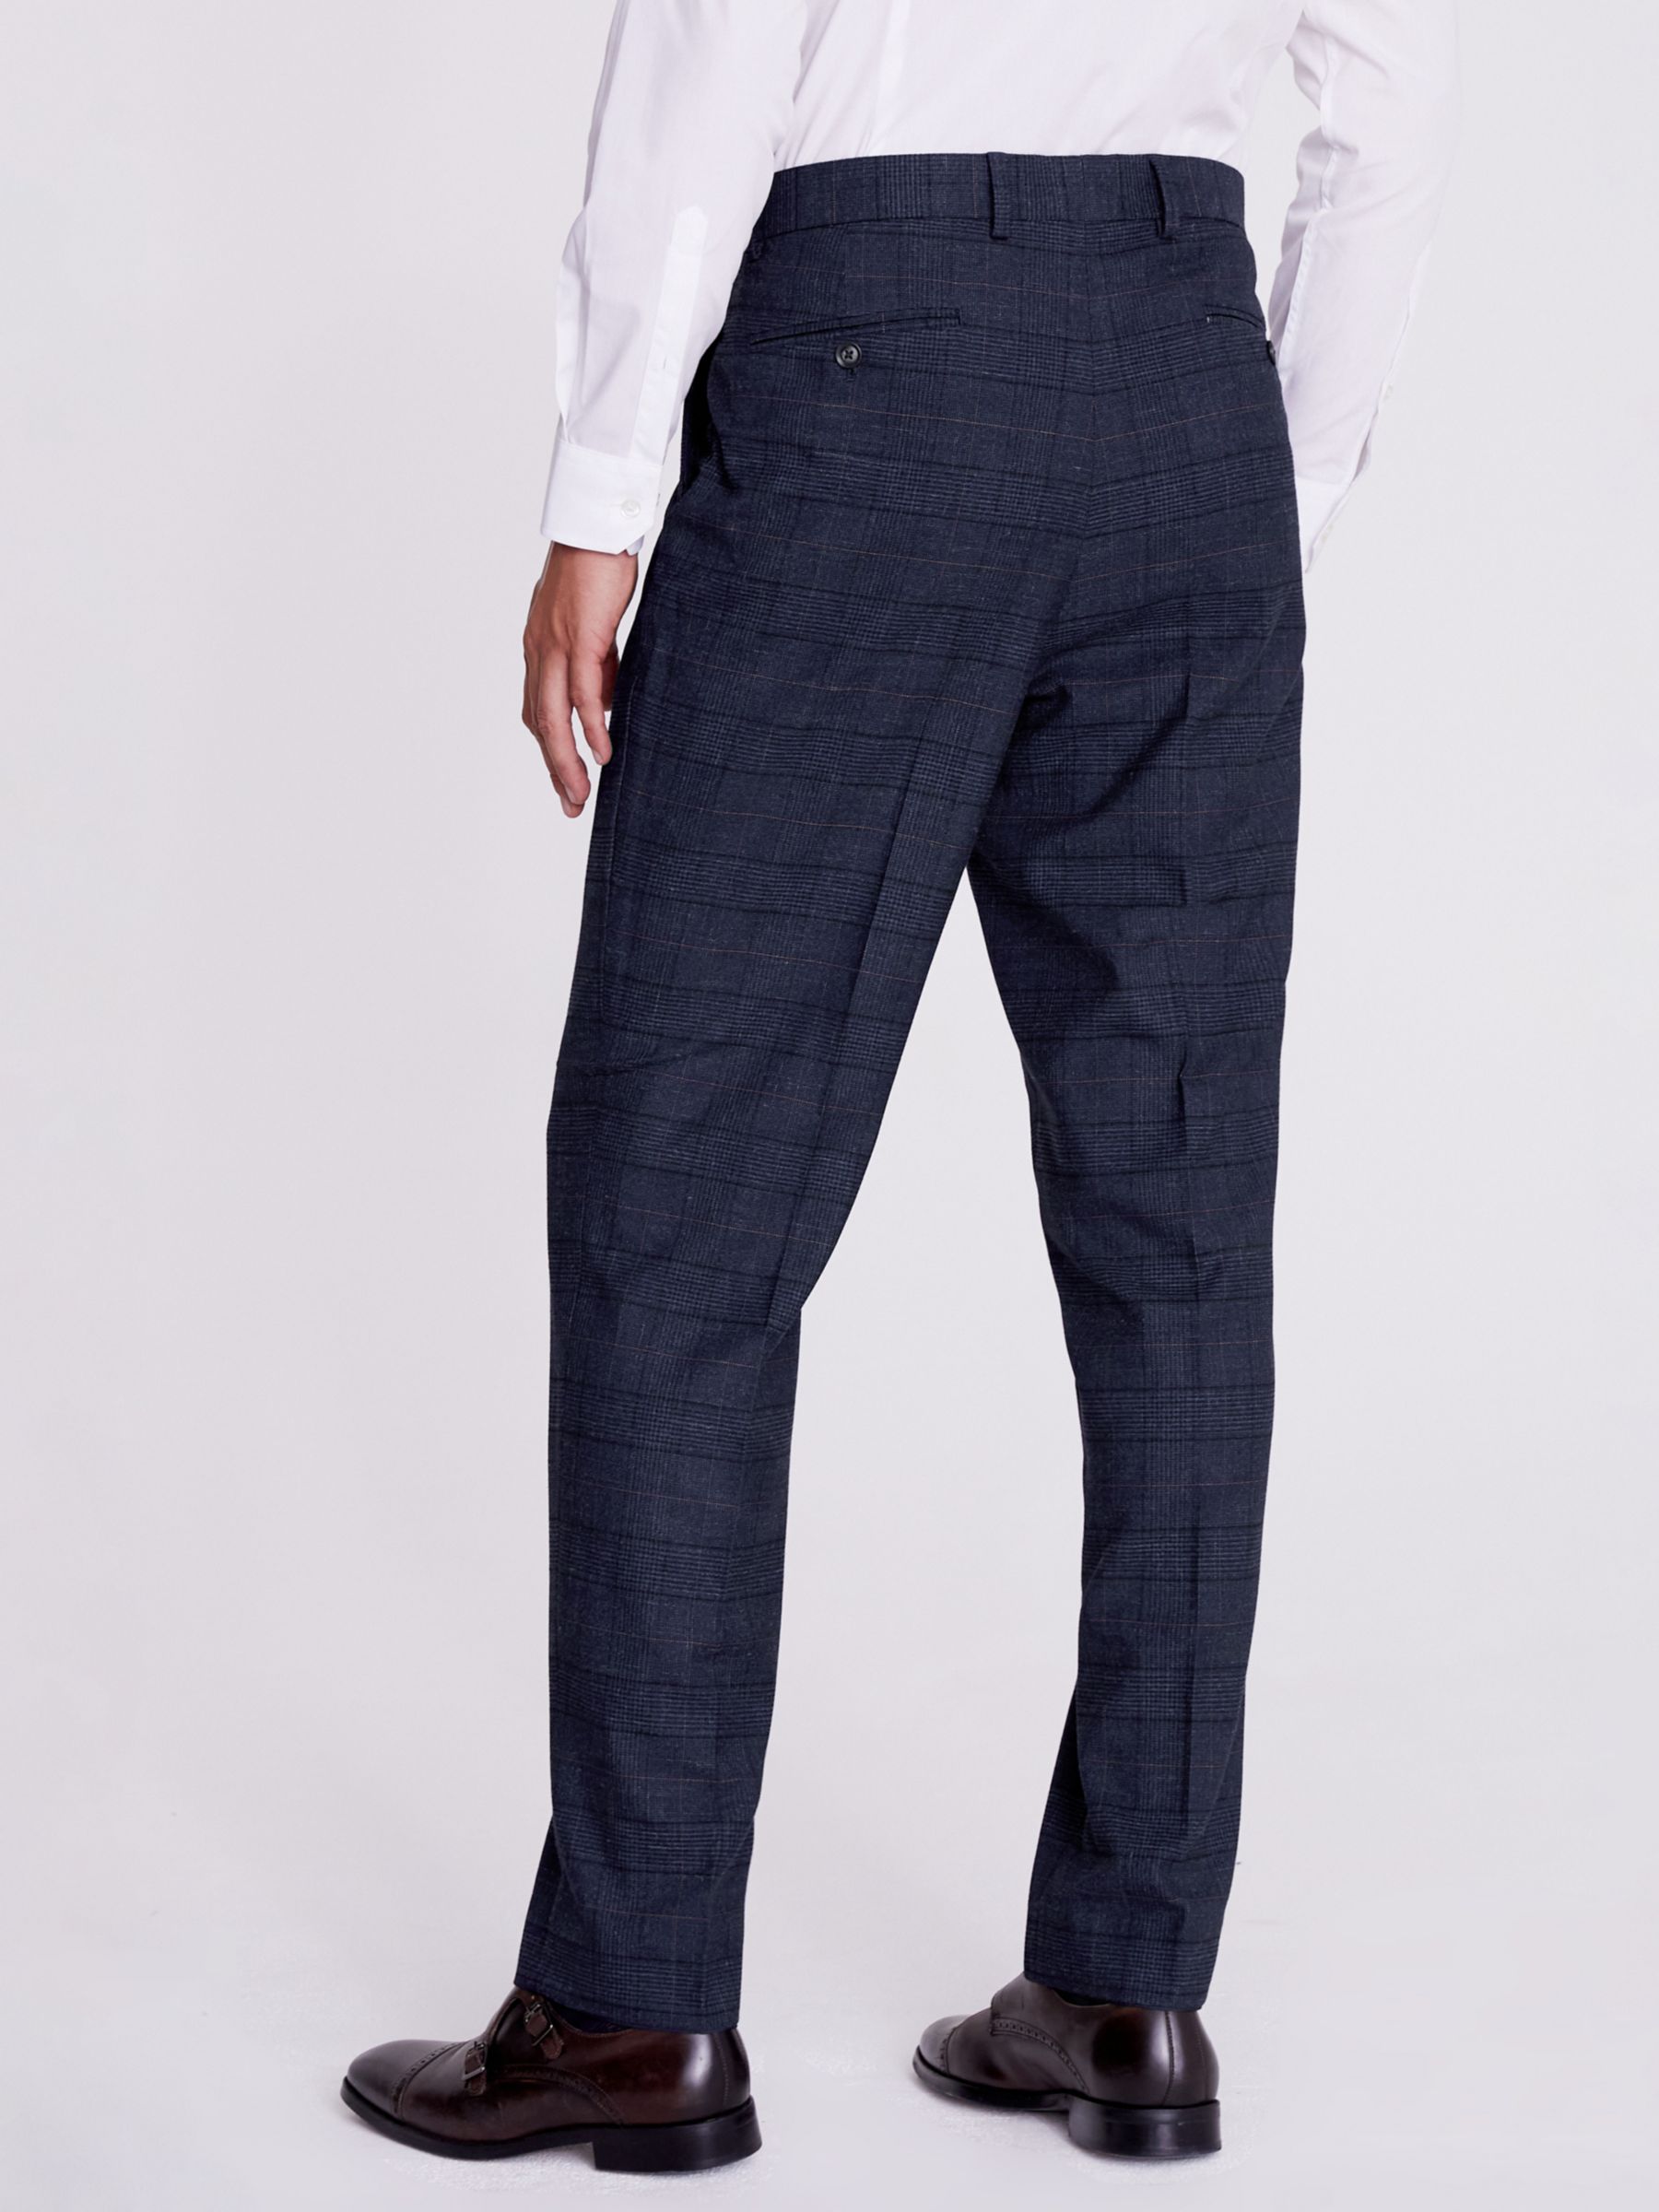 Moss Regular Fit Check Suit Trousers, Navy/Black, 28S